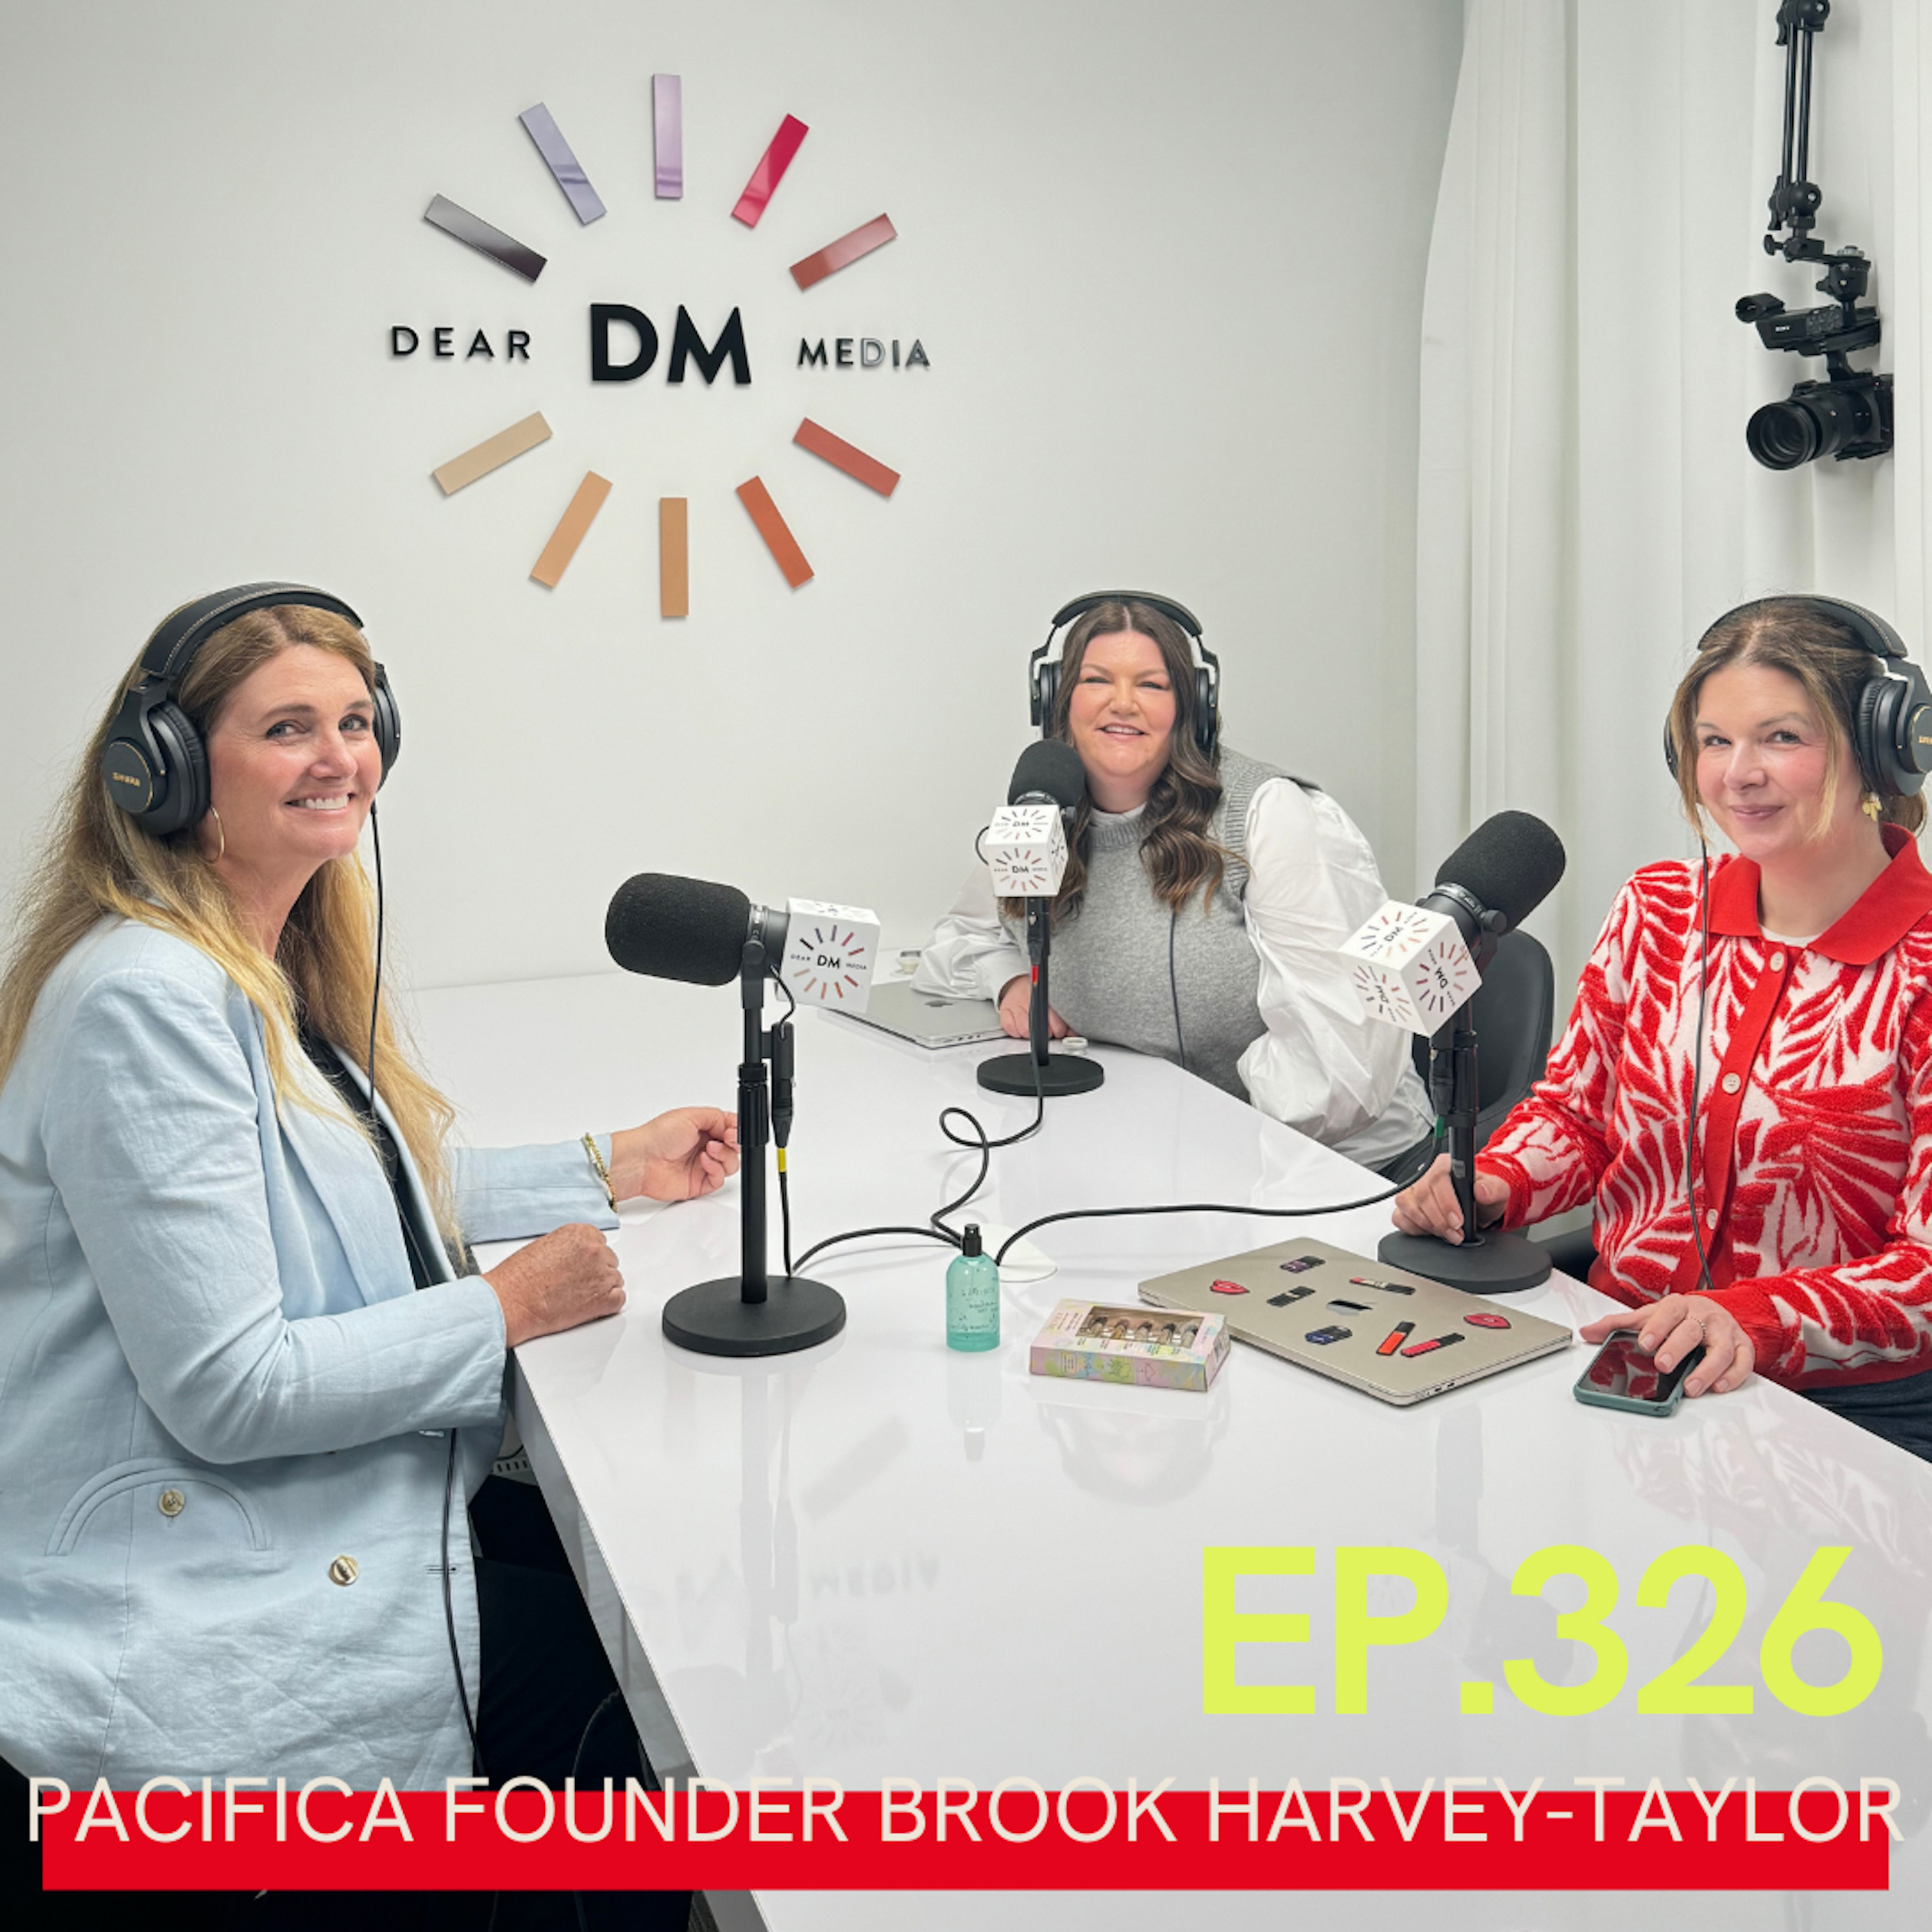 The Power of Aromatherapy, Affordable ”Clean” Beauty and Staying Relevant with Pacifica Founder Brook Harvey-Taylor